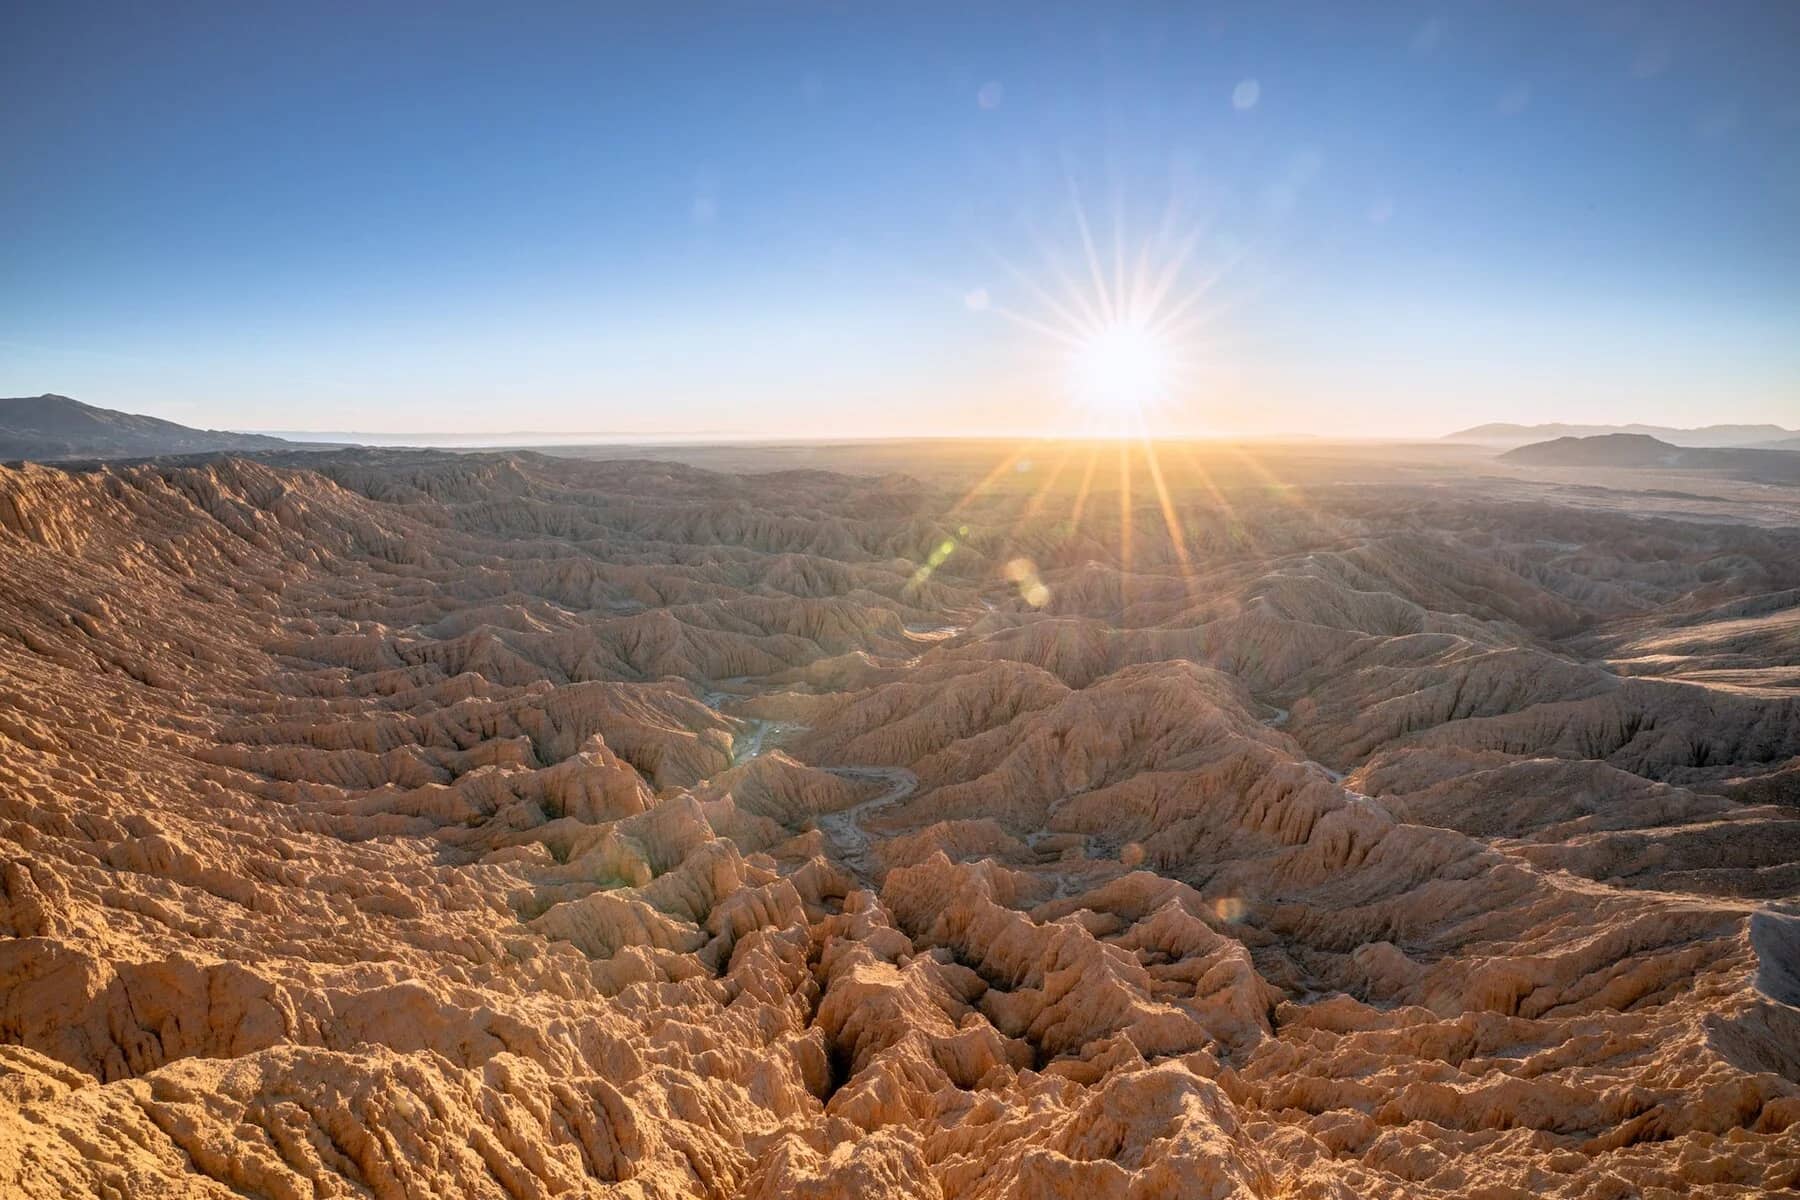 Image of Anza Borrego State Park to convey the best hikes in Southern California